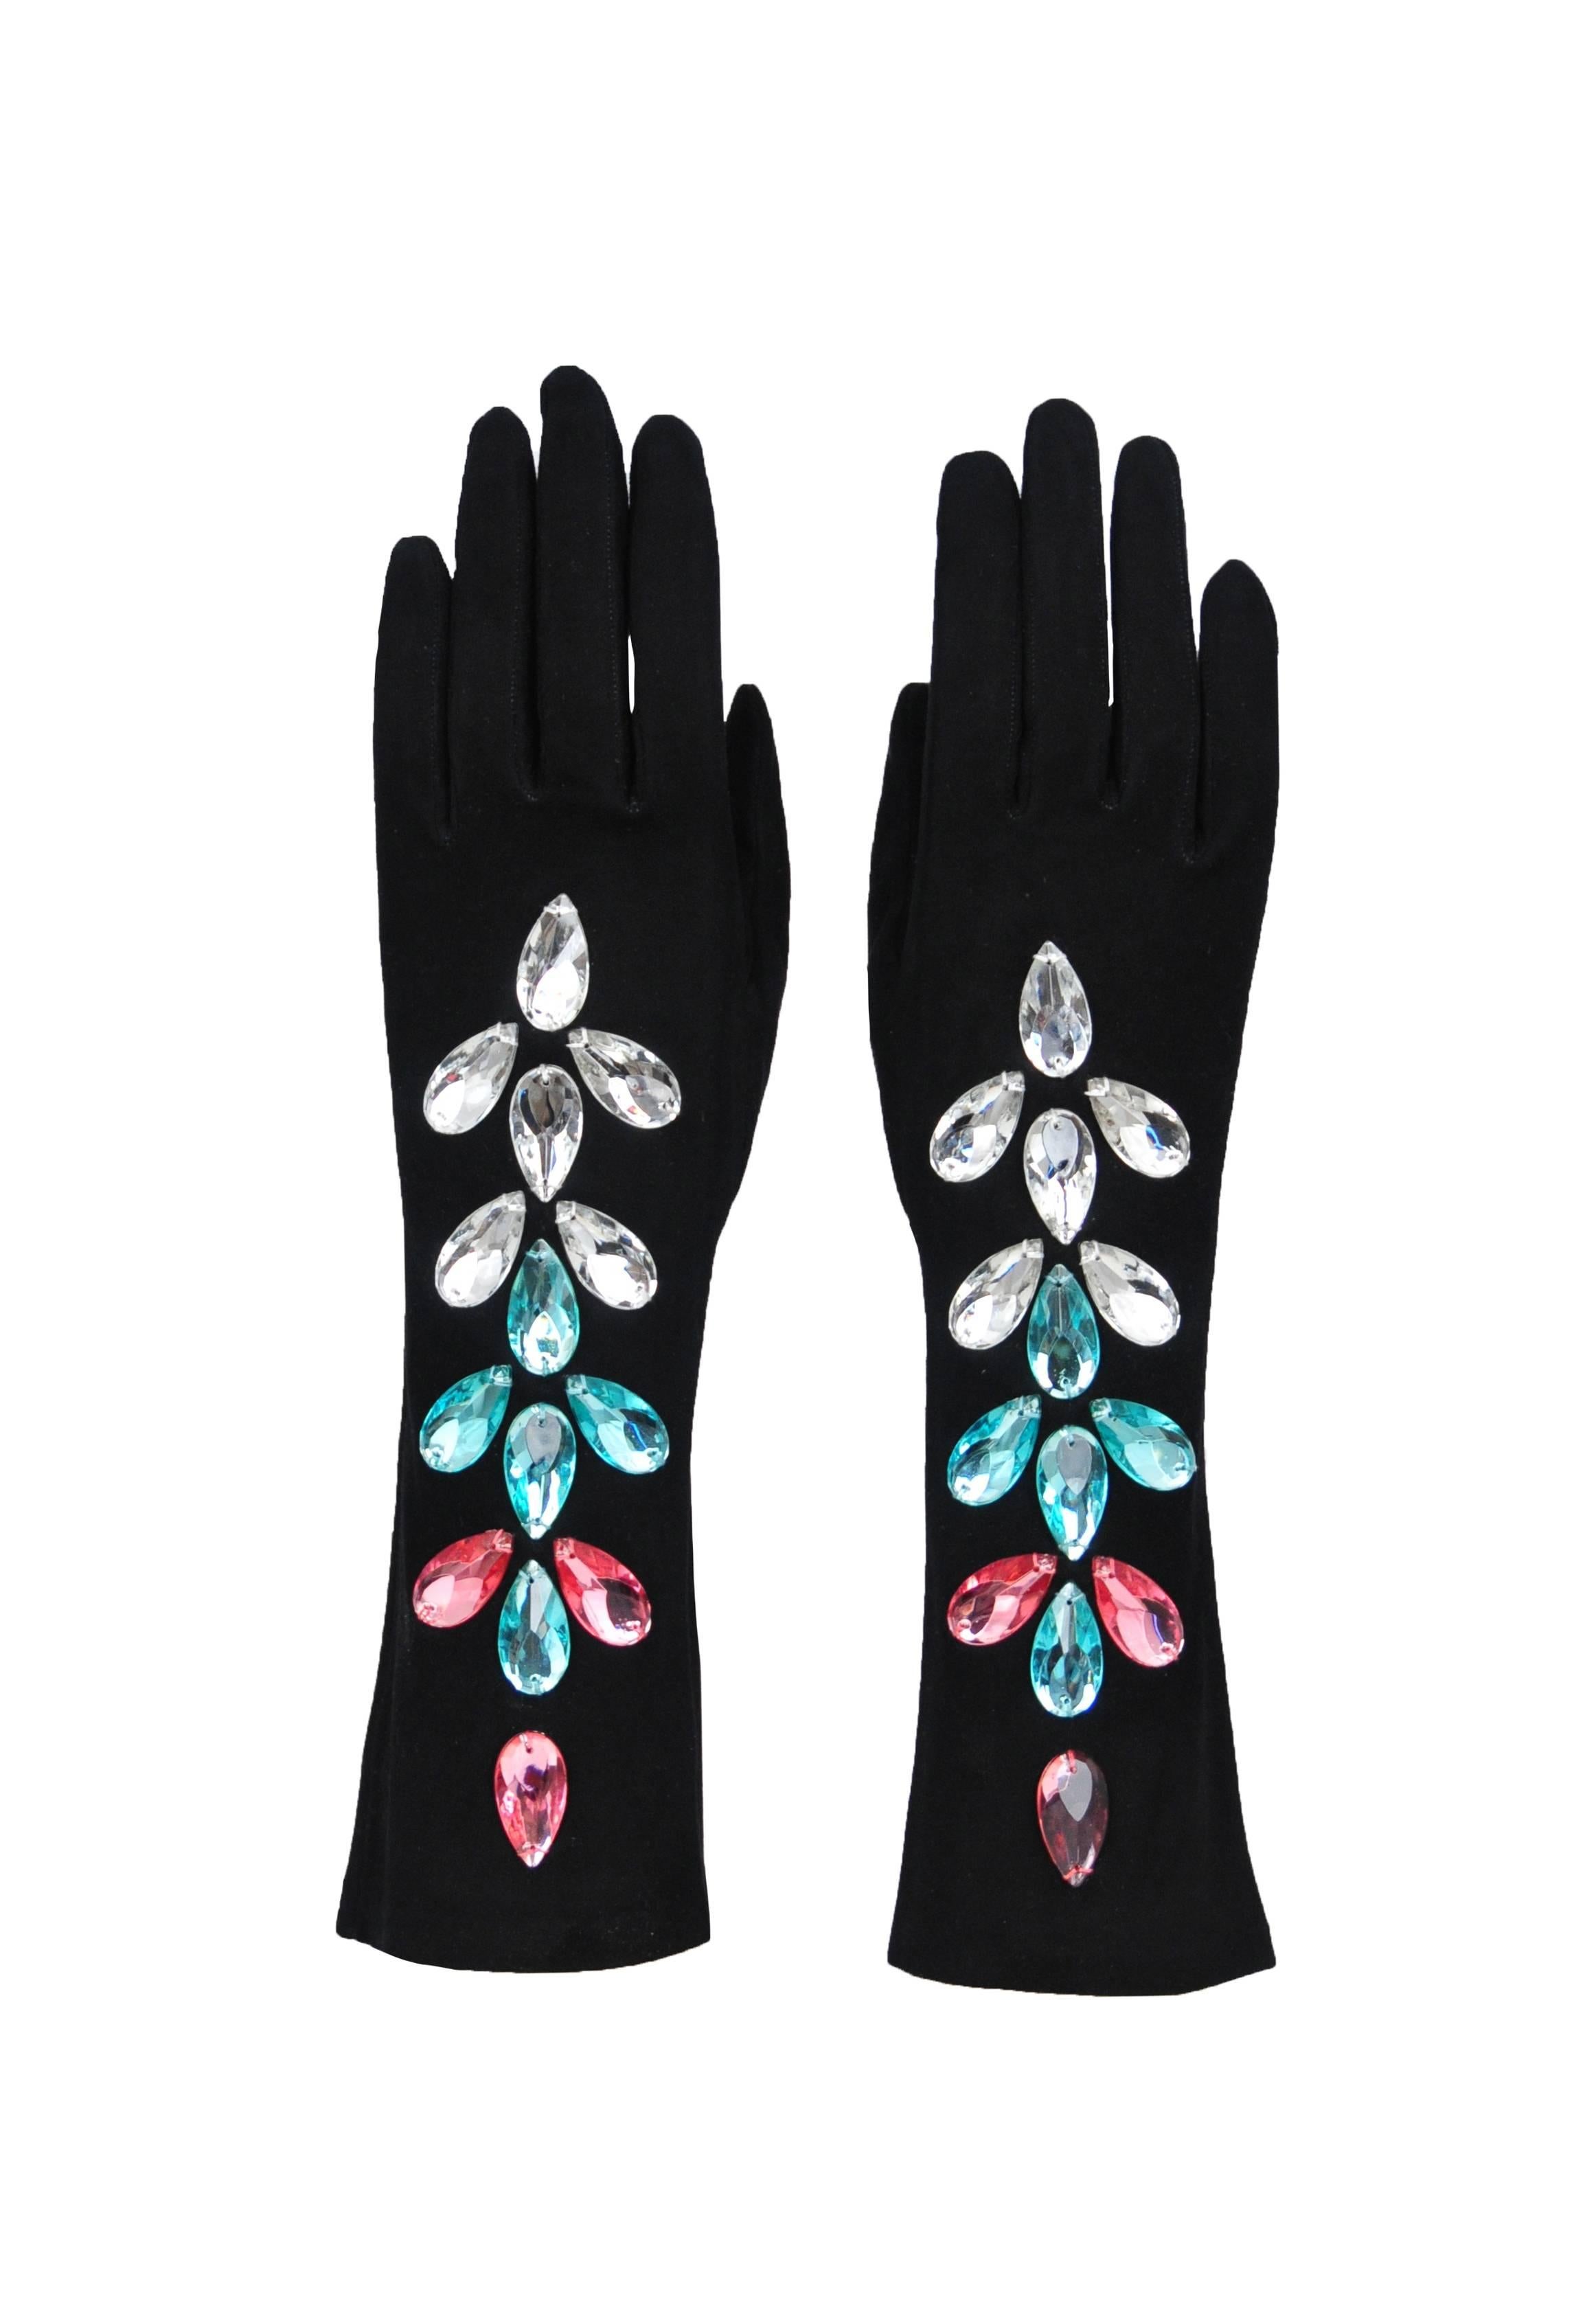 Vintage Yves Saint Laurent black suede gloves adorned with pink, turquoise and clear pear shaped crystal beads.